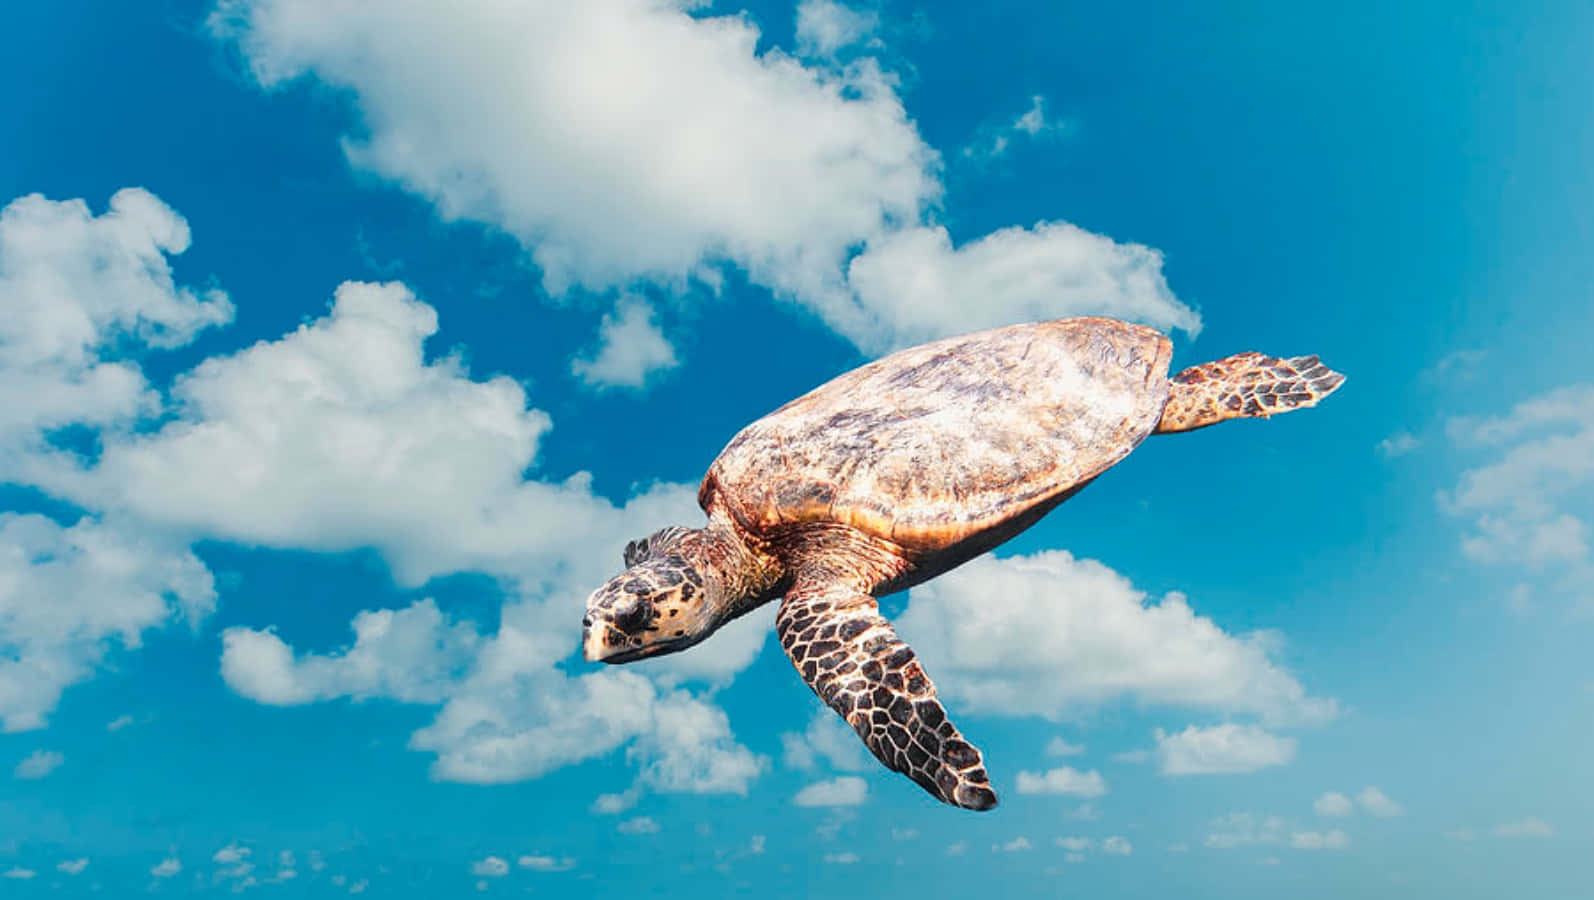 A Sea Turtle Swimming In The Blue Sky